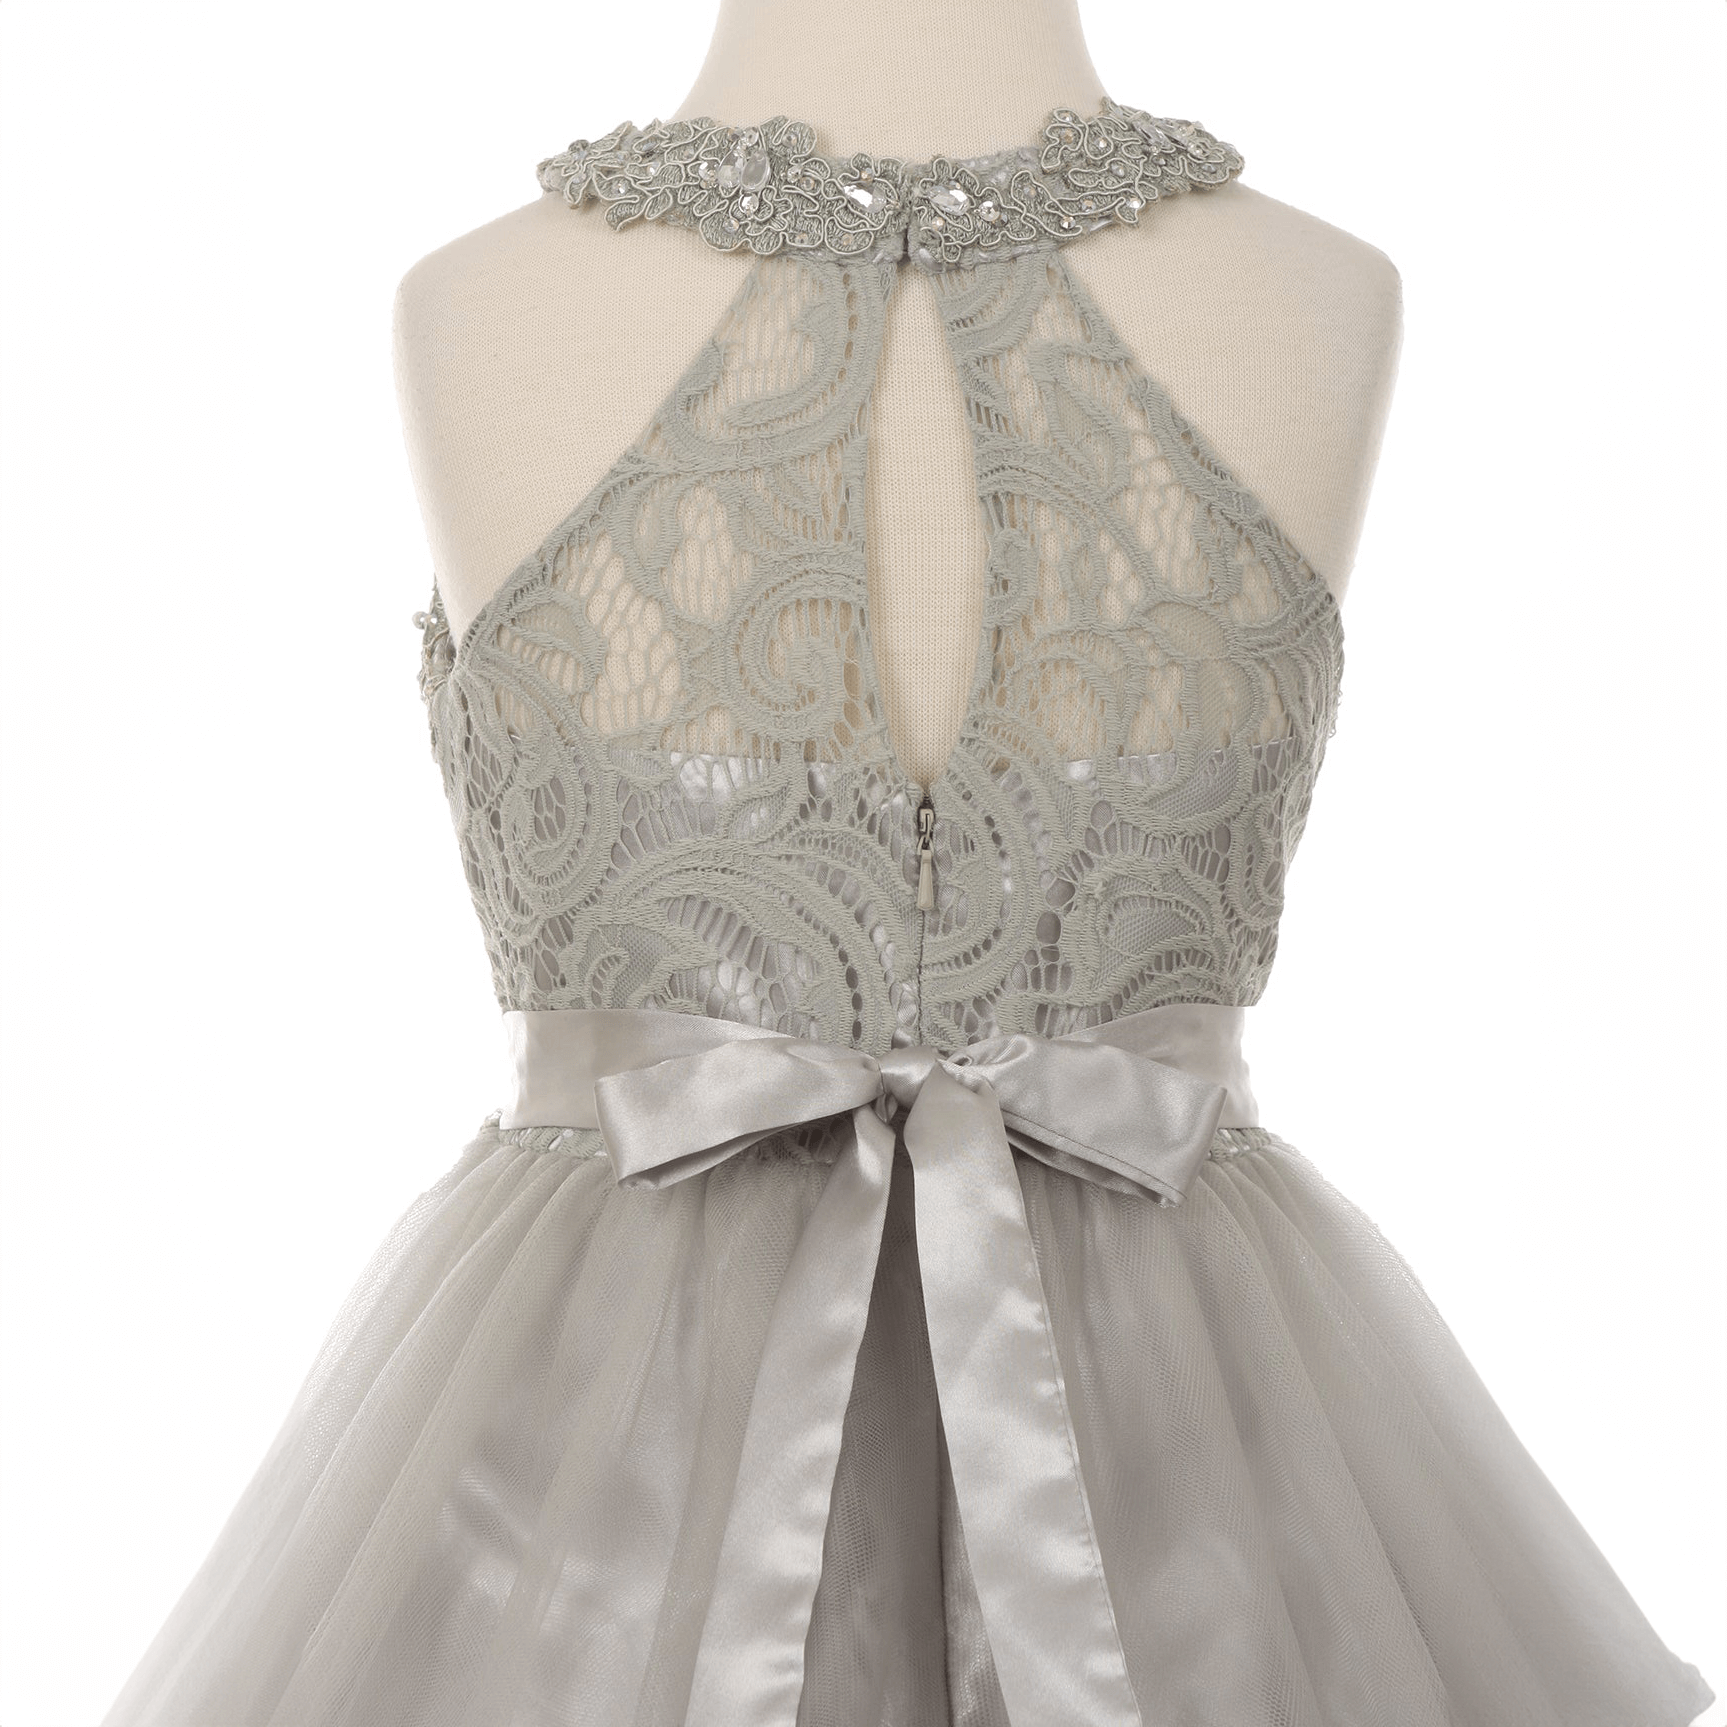 silver coloured beaded halter neck dress from The Fairy Princess Shop